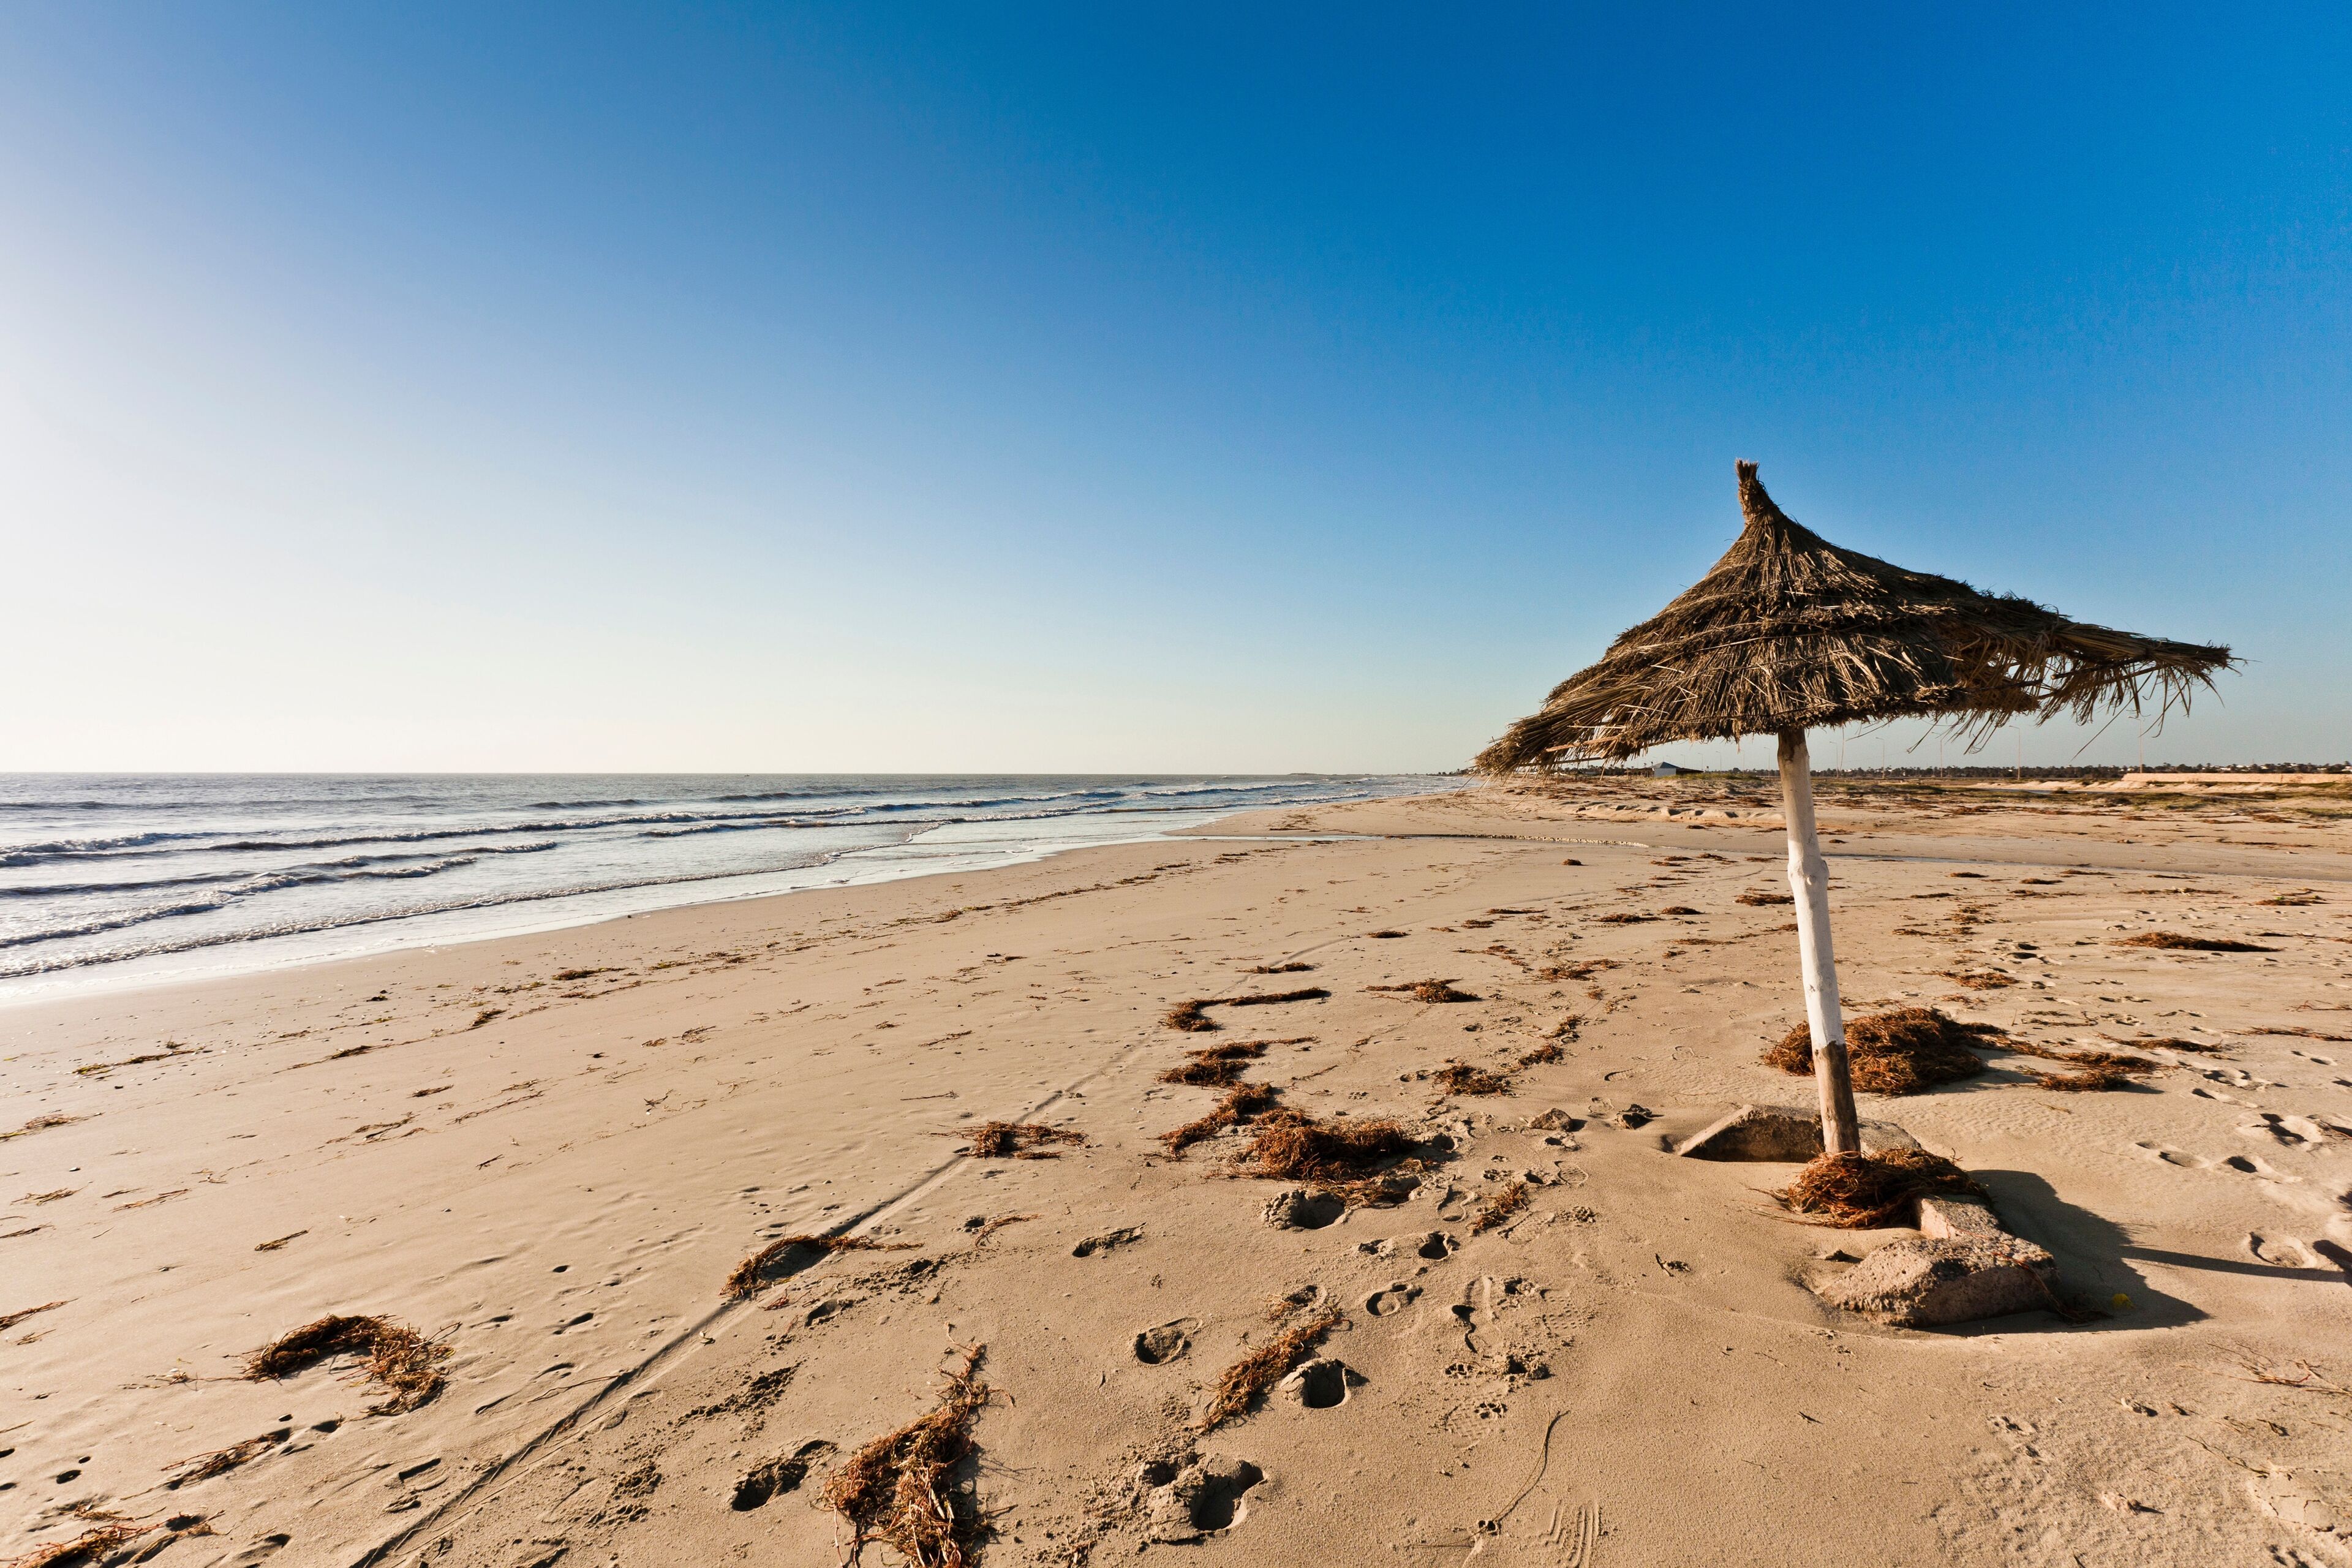 A lone thatched umbrella stands on a sandy beach with gentle waves, clear skies, and no people in sight.